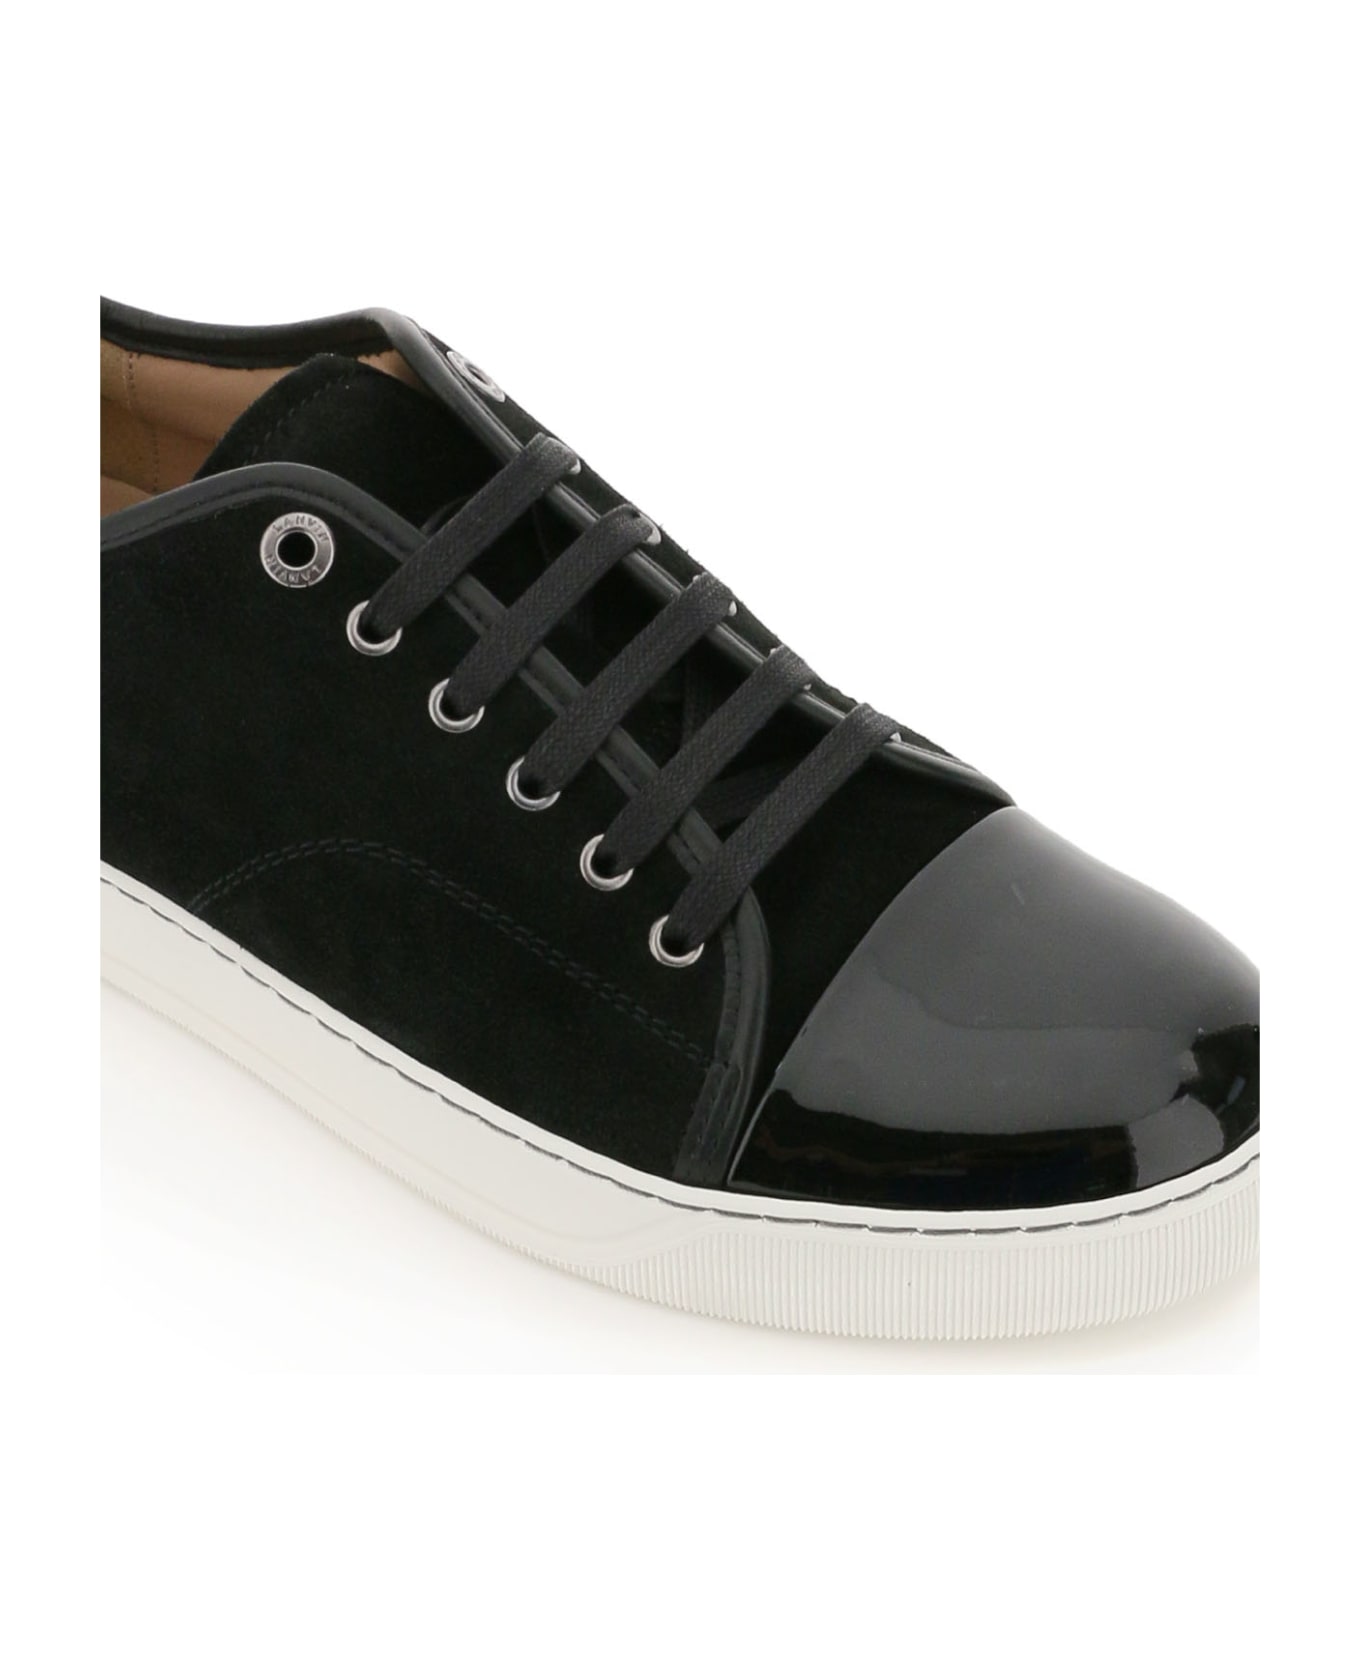 Lanvin Dbb1 Sneakers In Black Suede And Leather - BLACK (Black)